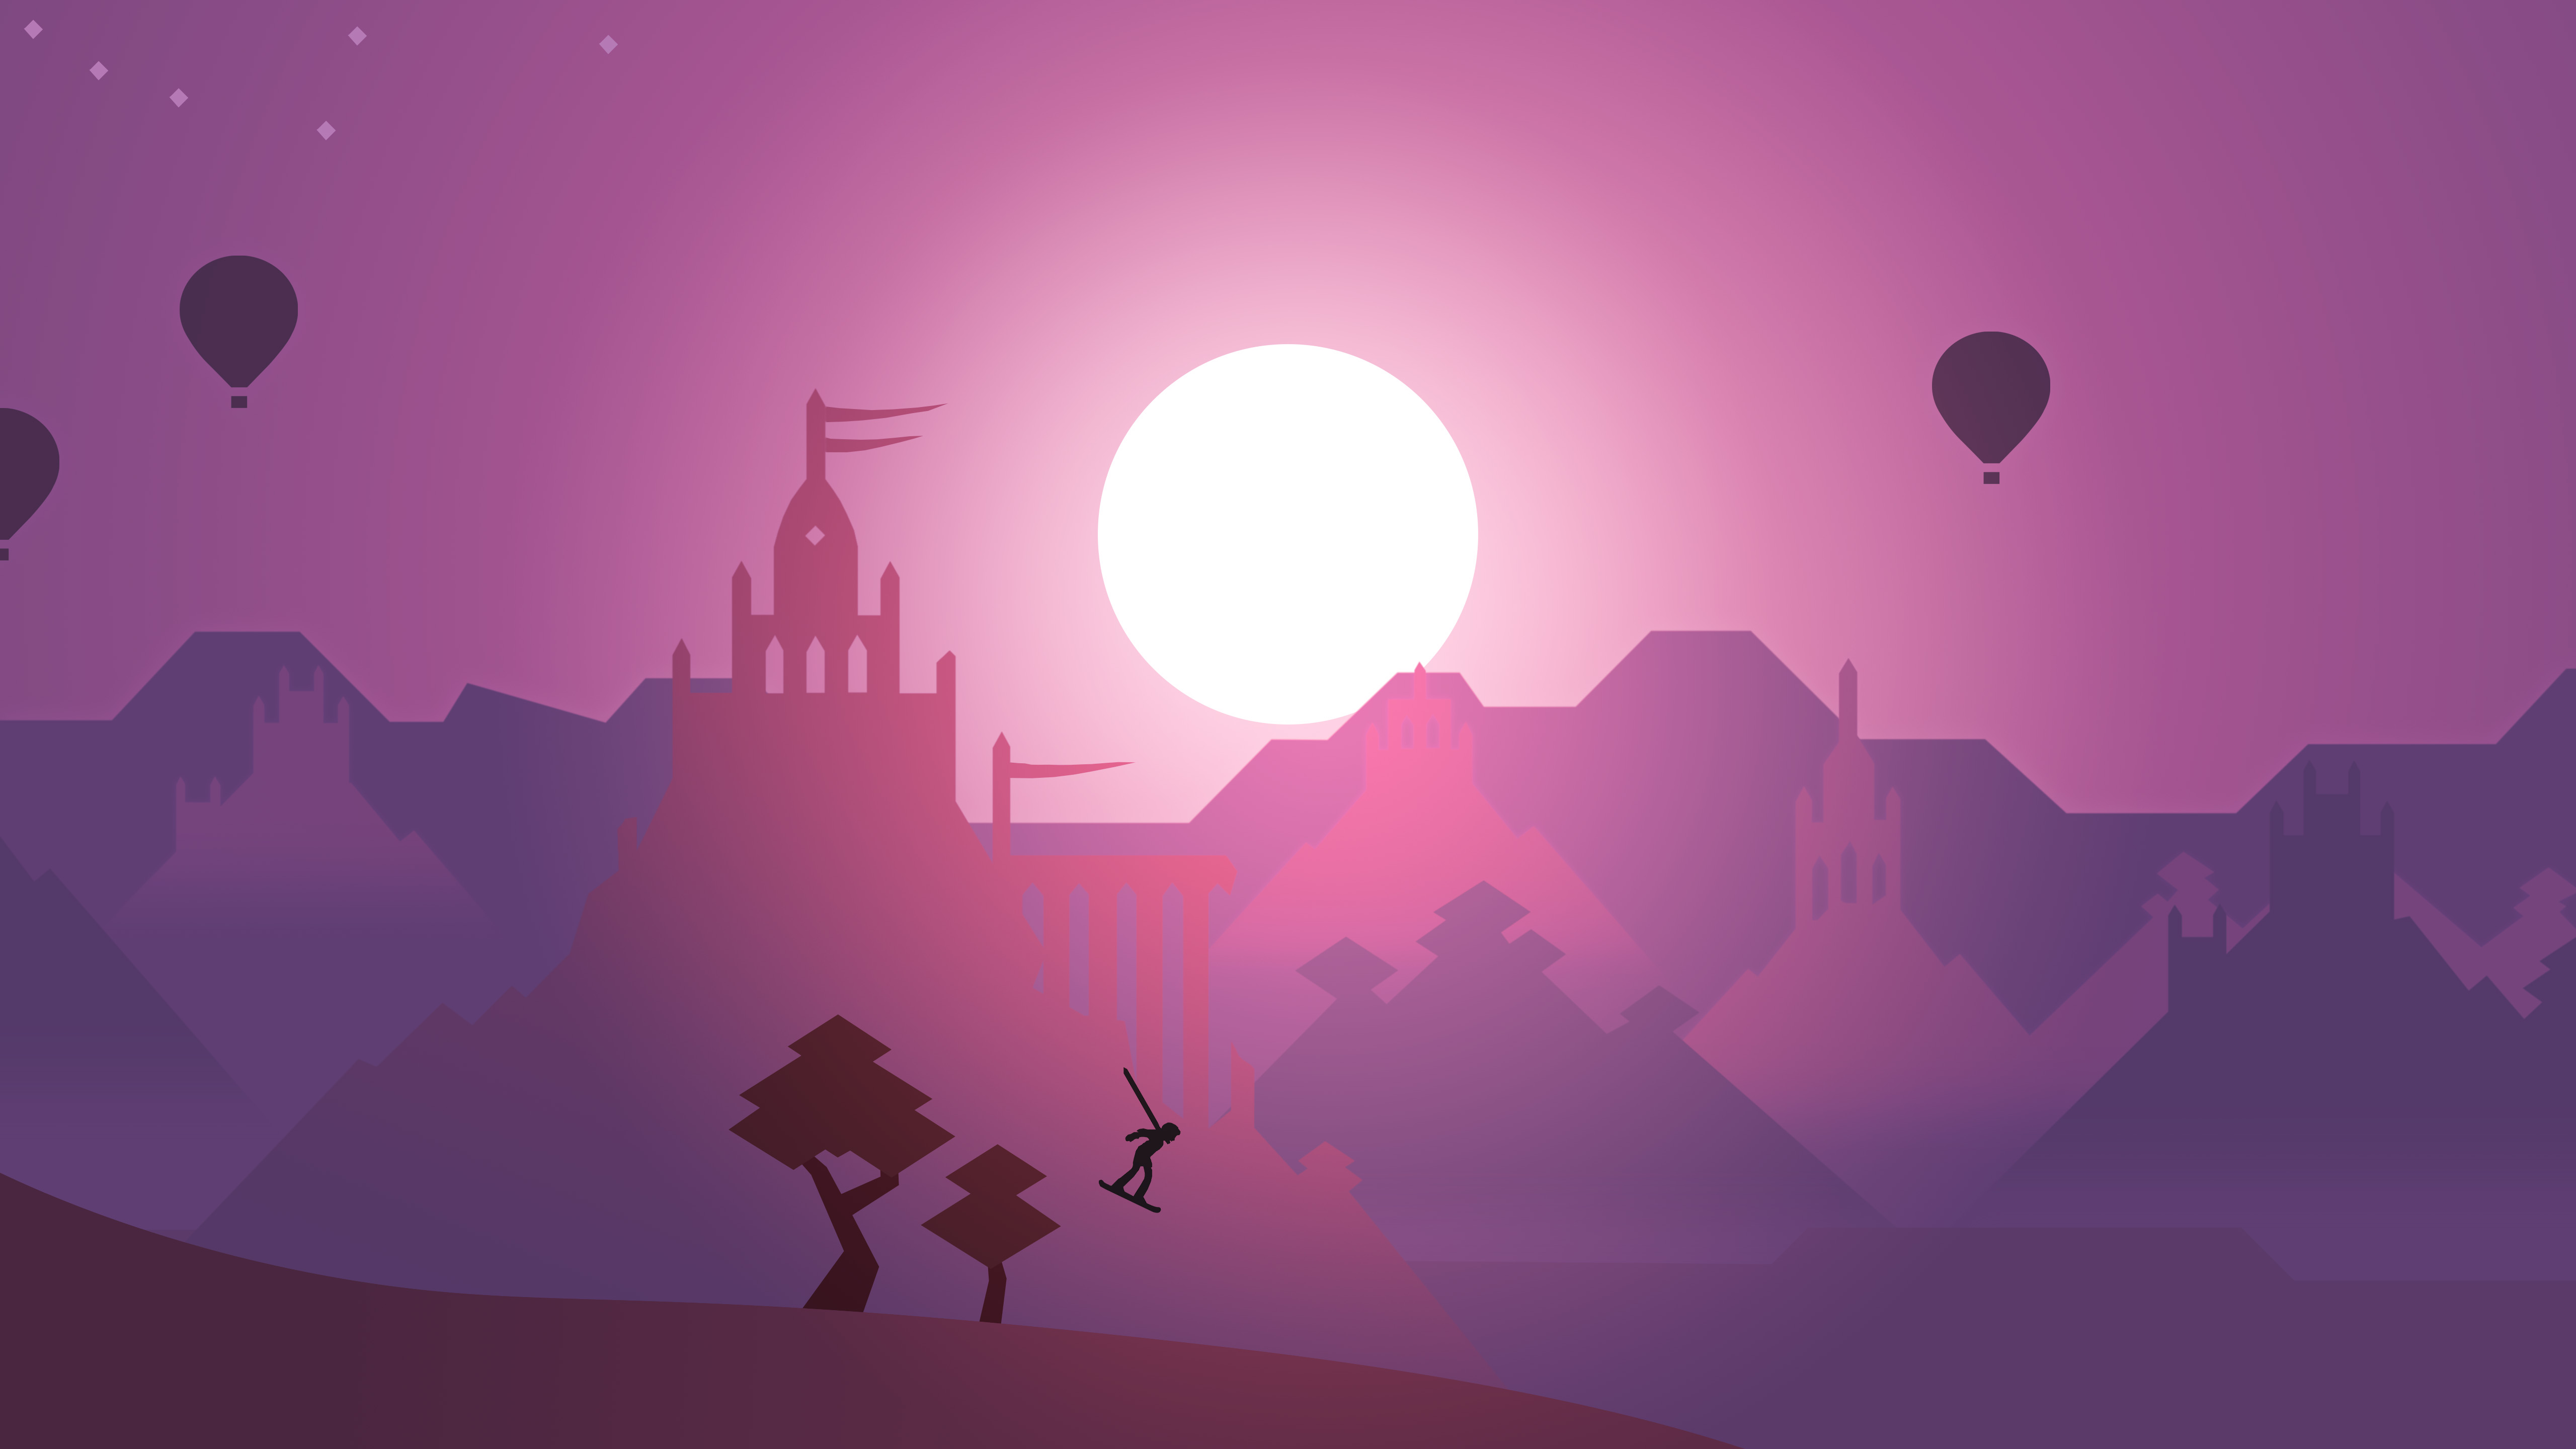 Alto's Odyssey HDGaming Wallpapers